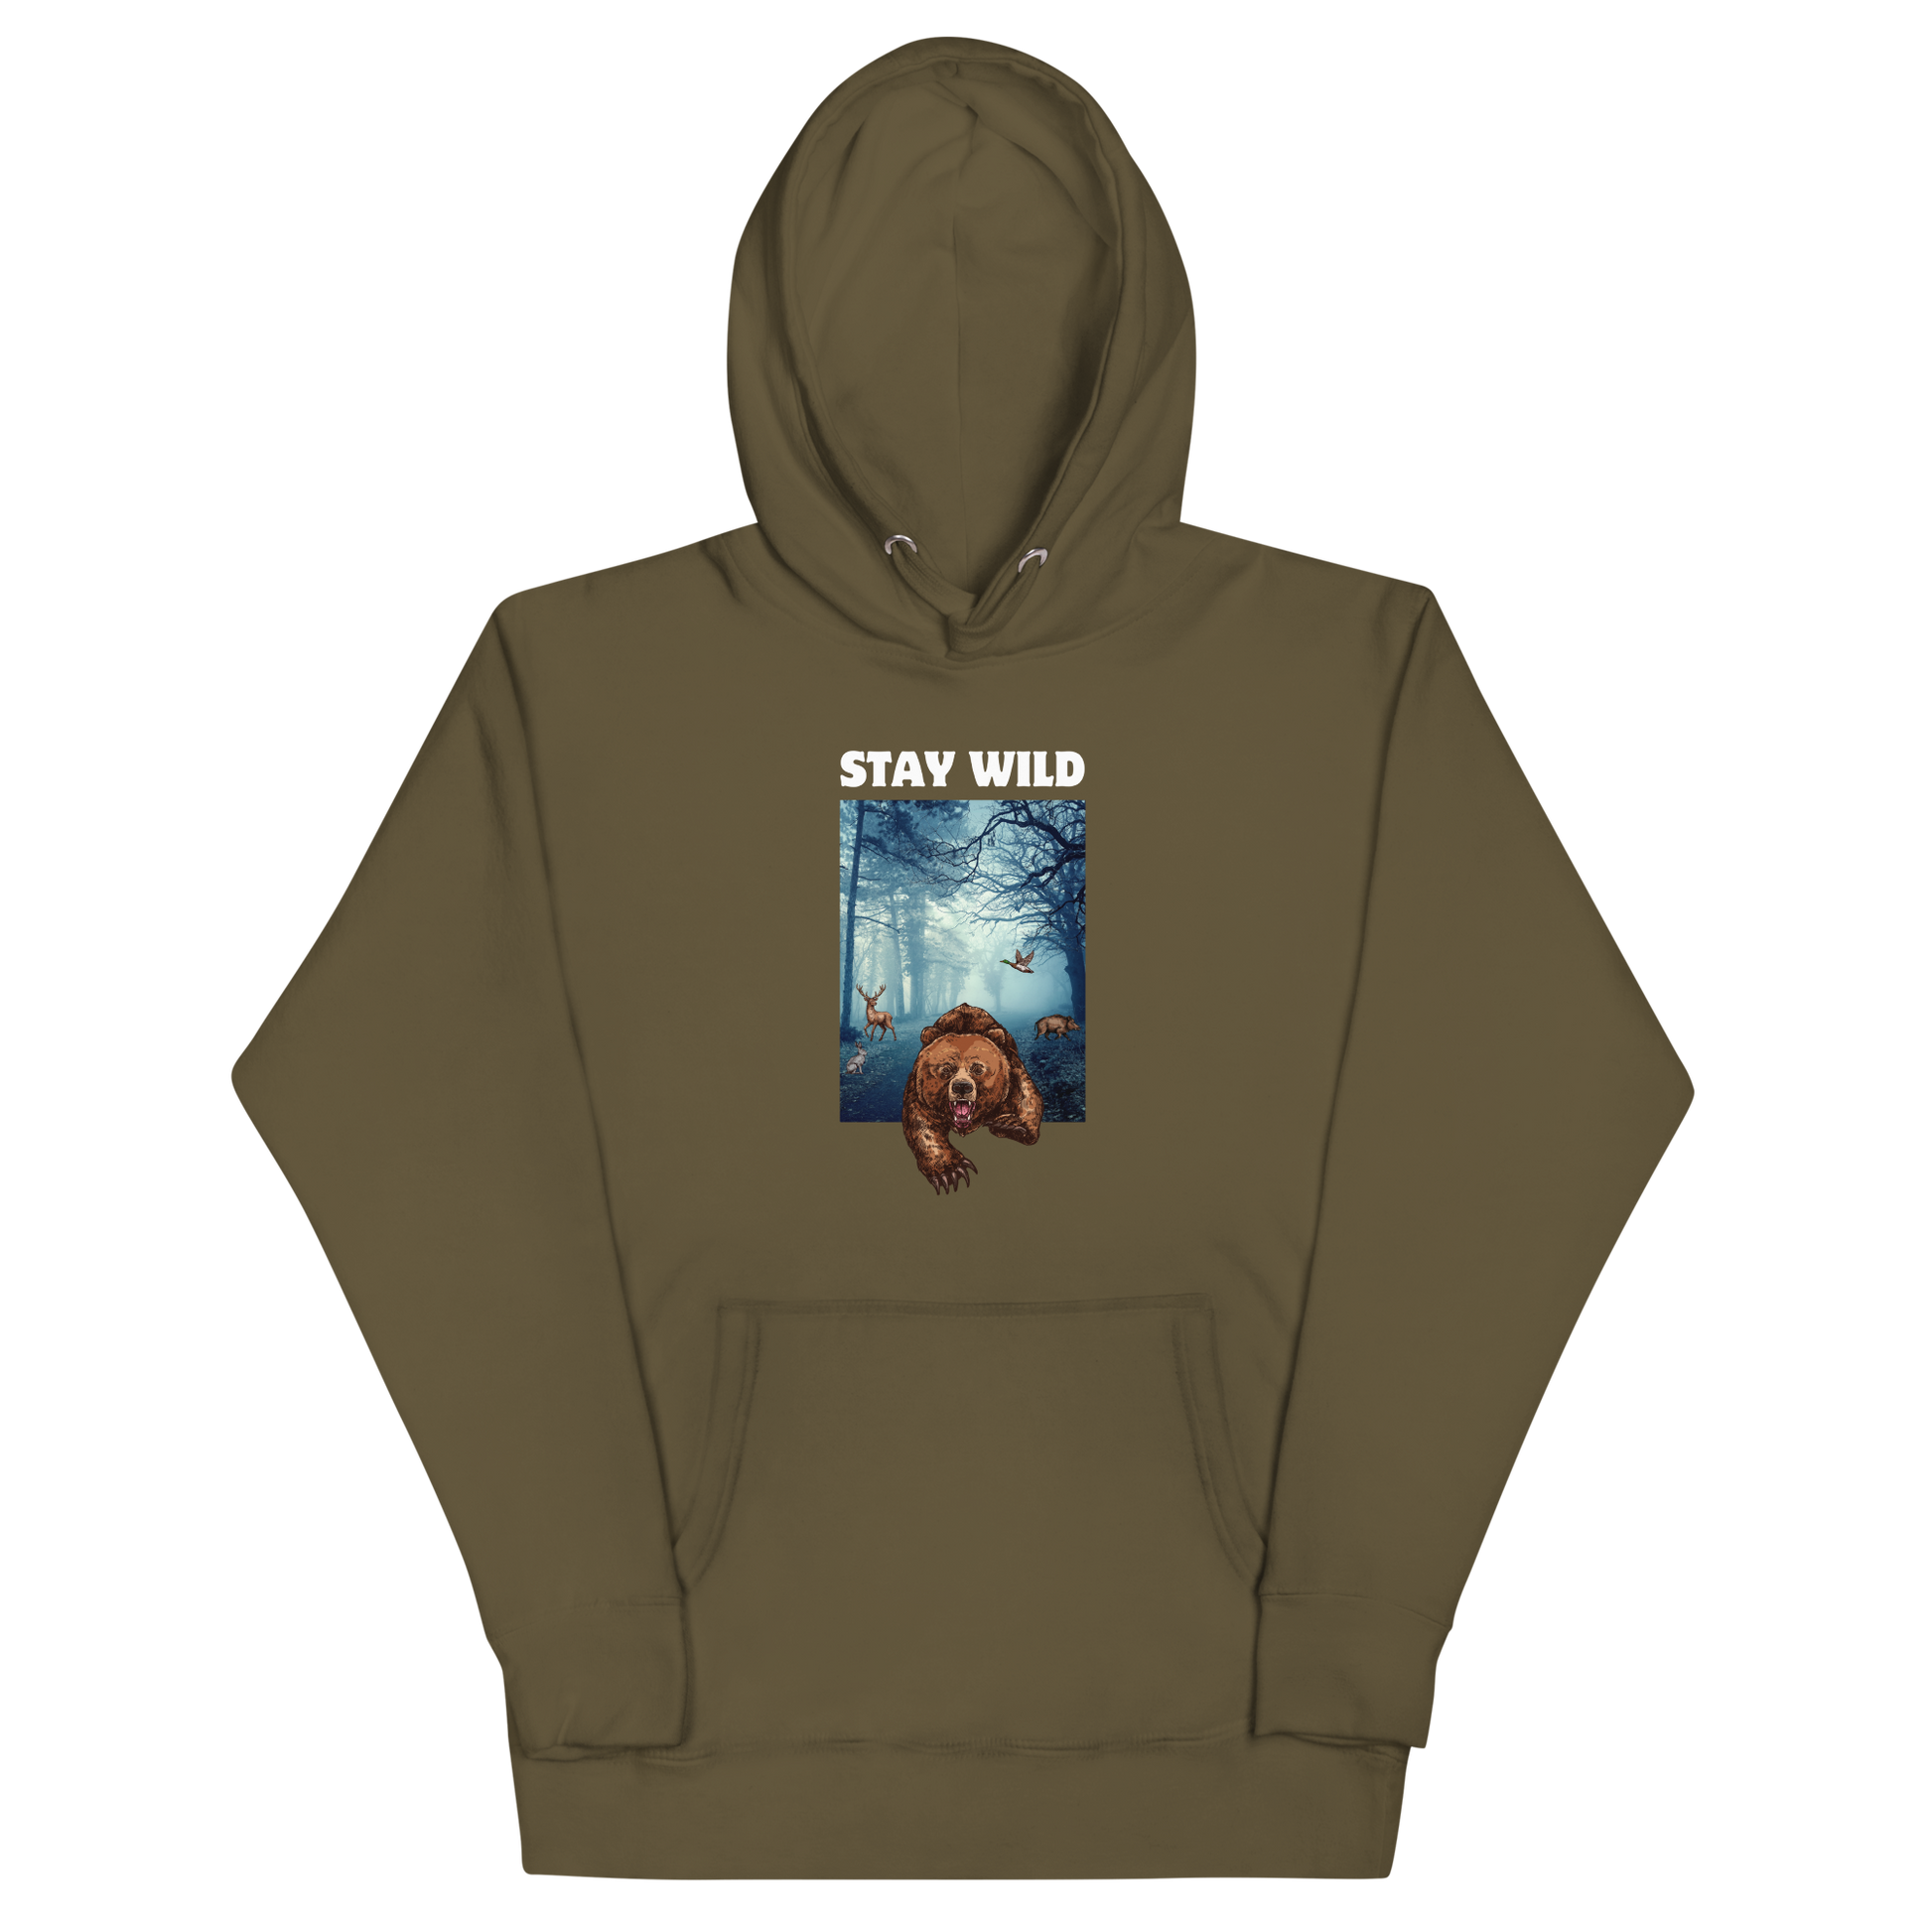 Military Green Premium Bear Hoodie featuring a Stay Wild graphic on the chest - Cool Graphic Bear Hoodies - Boozy Fox